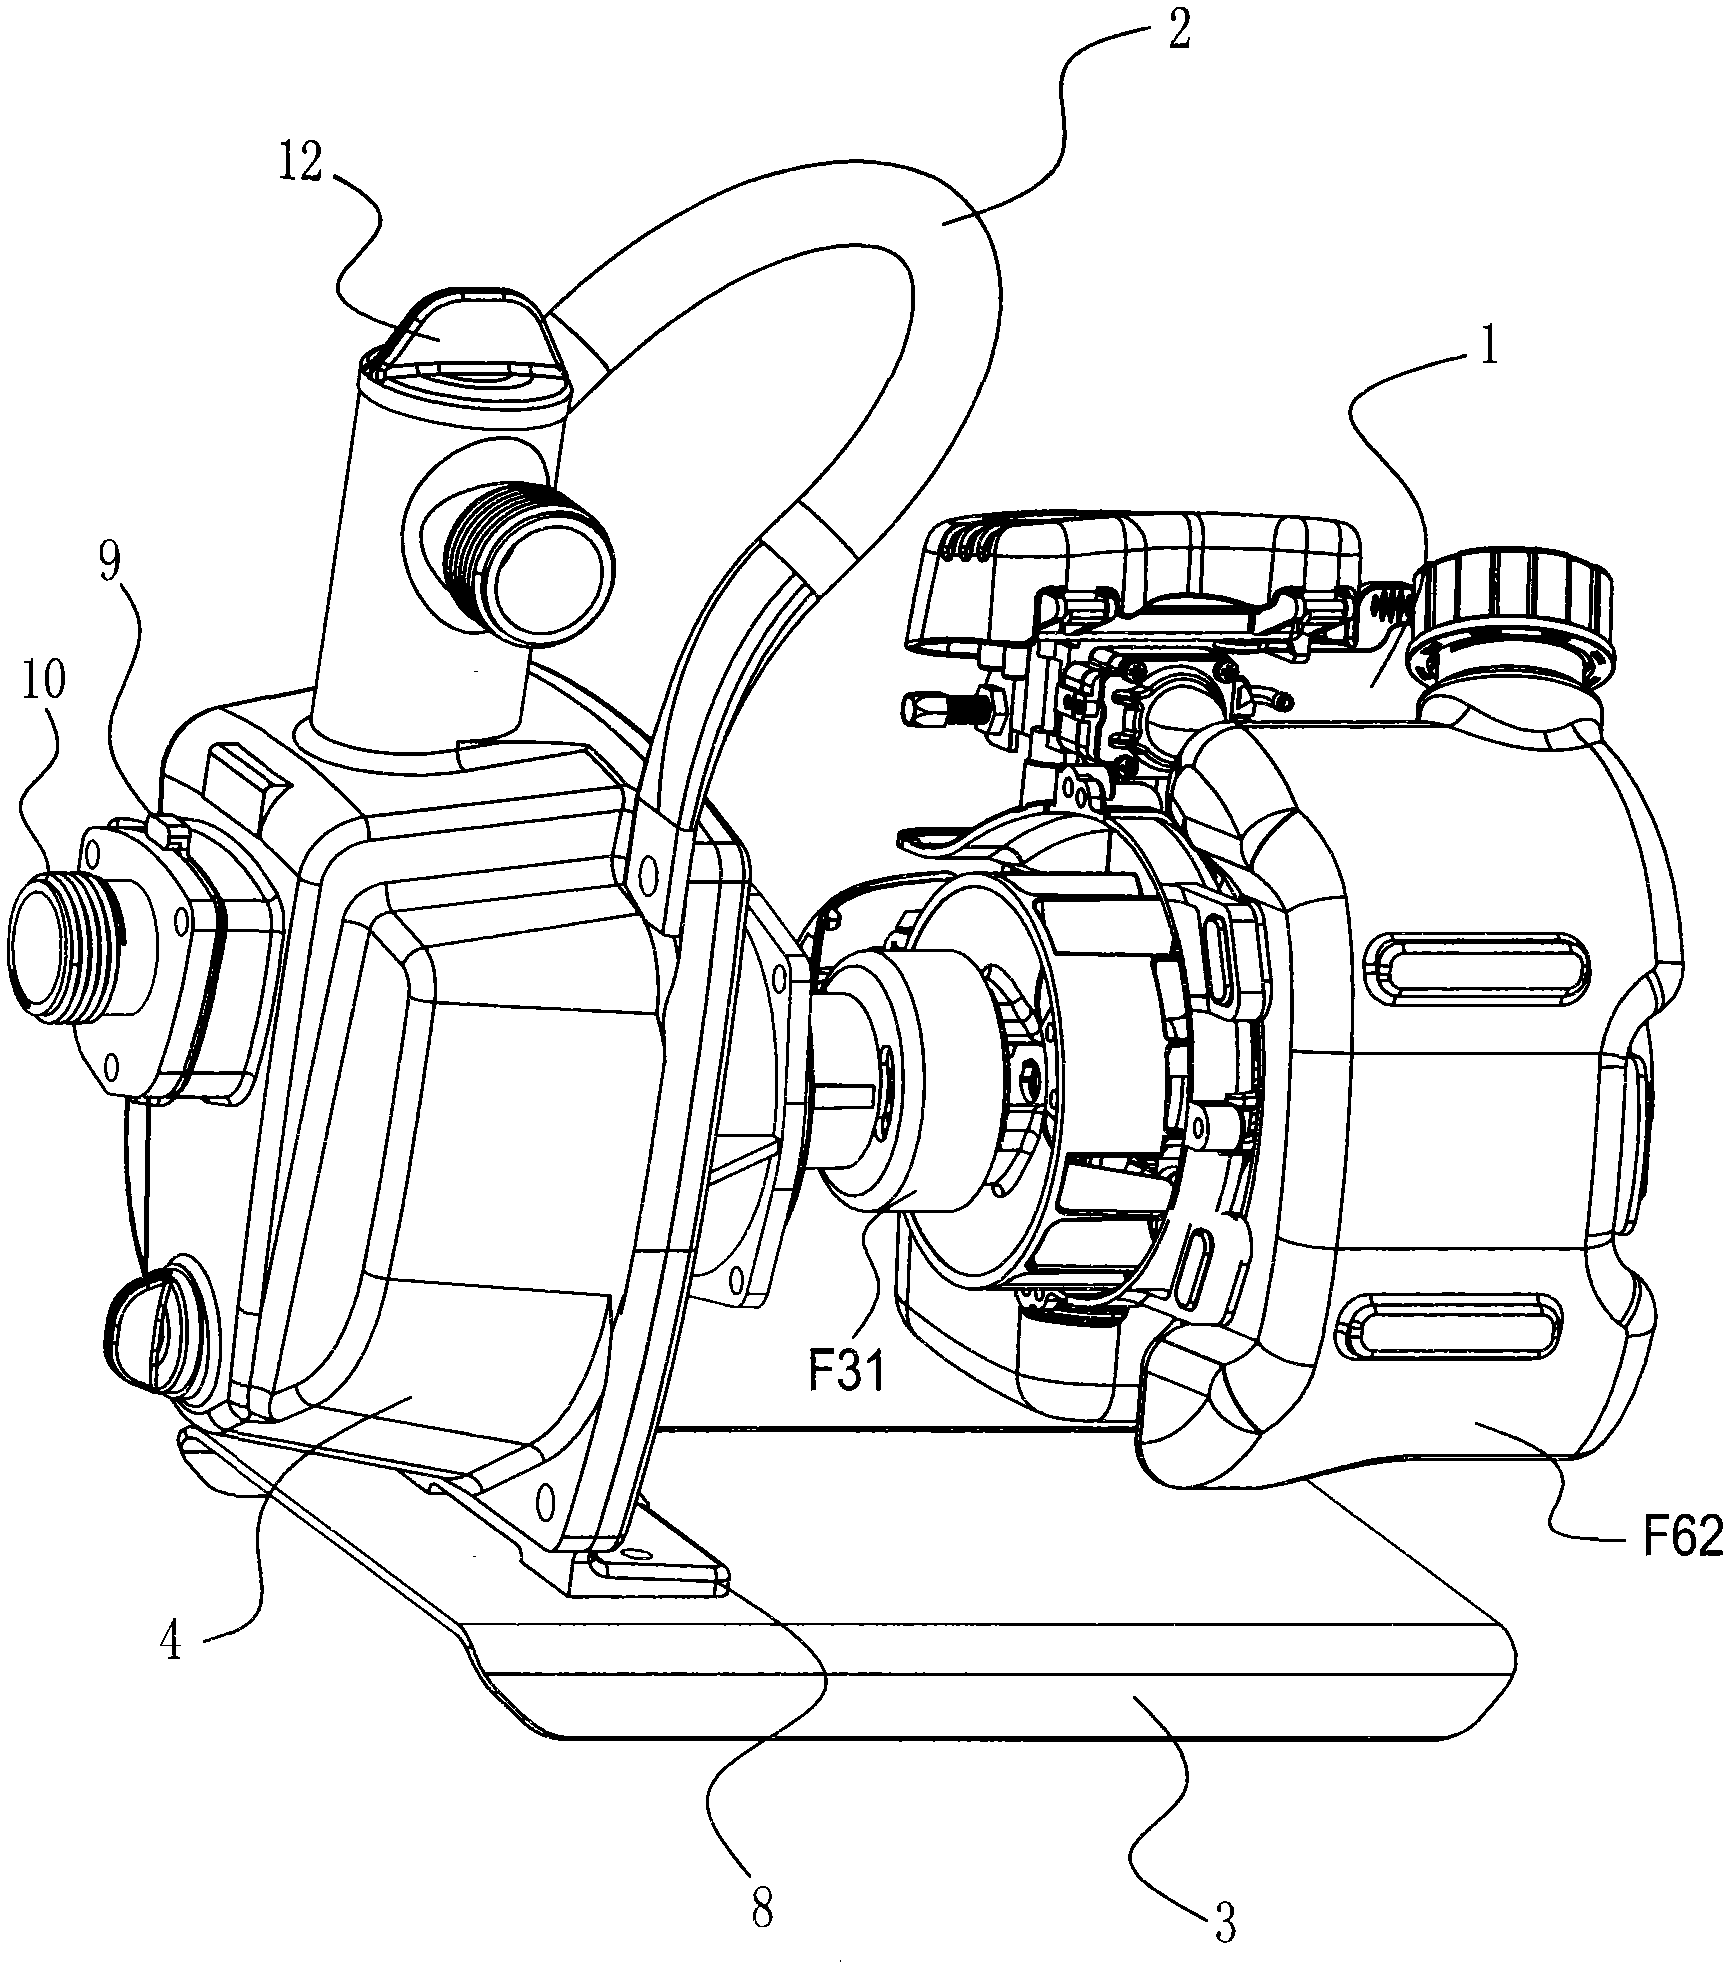 Centrifugal pump with swirl sprayer engine directly connected with high-speed function vane wheel and even-spinning labyrinth